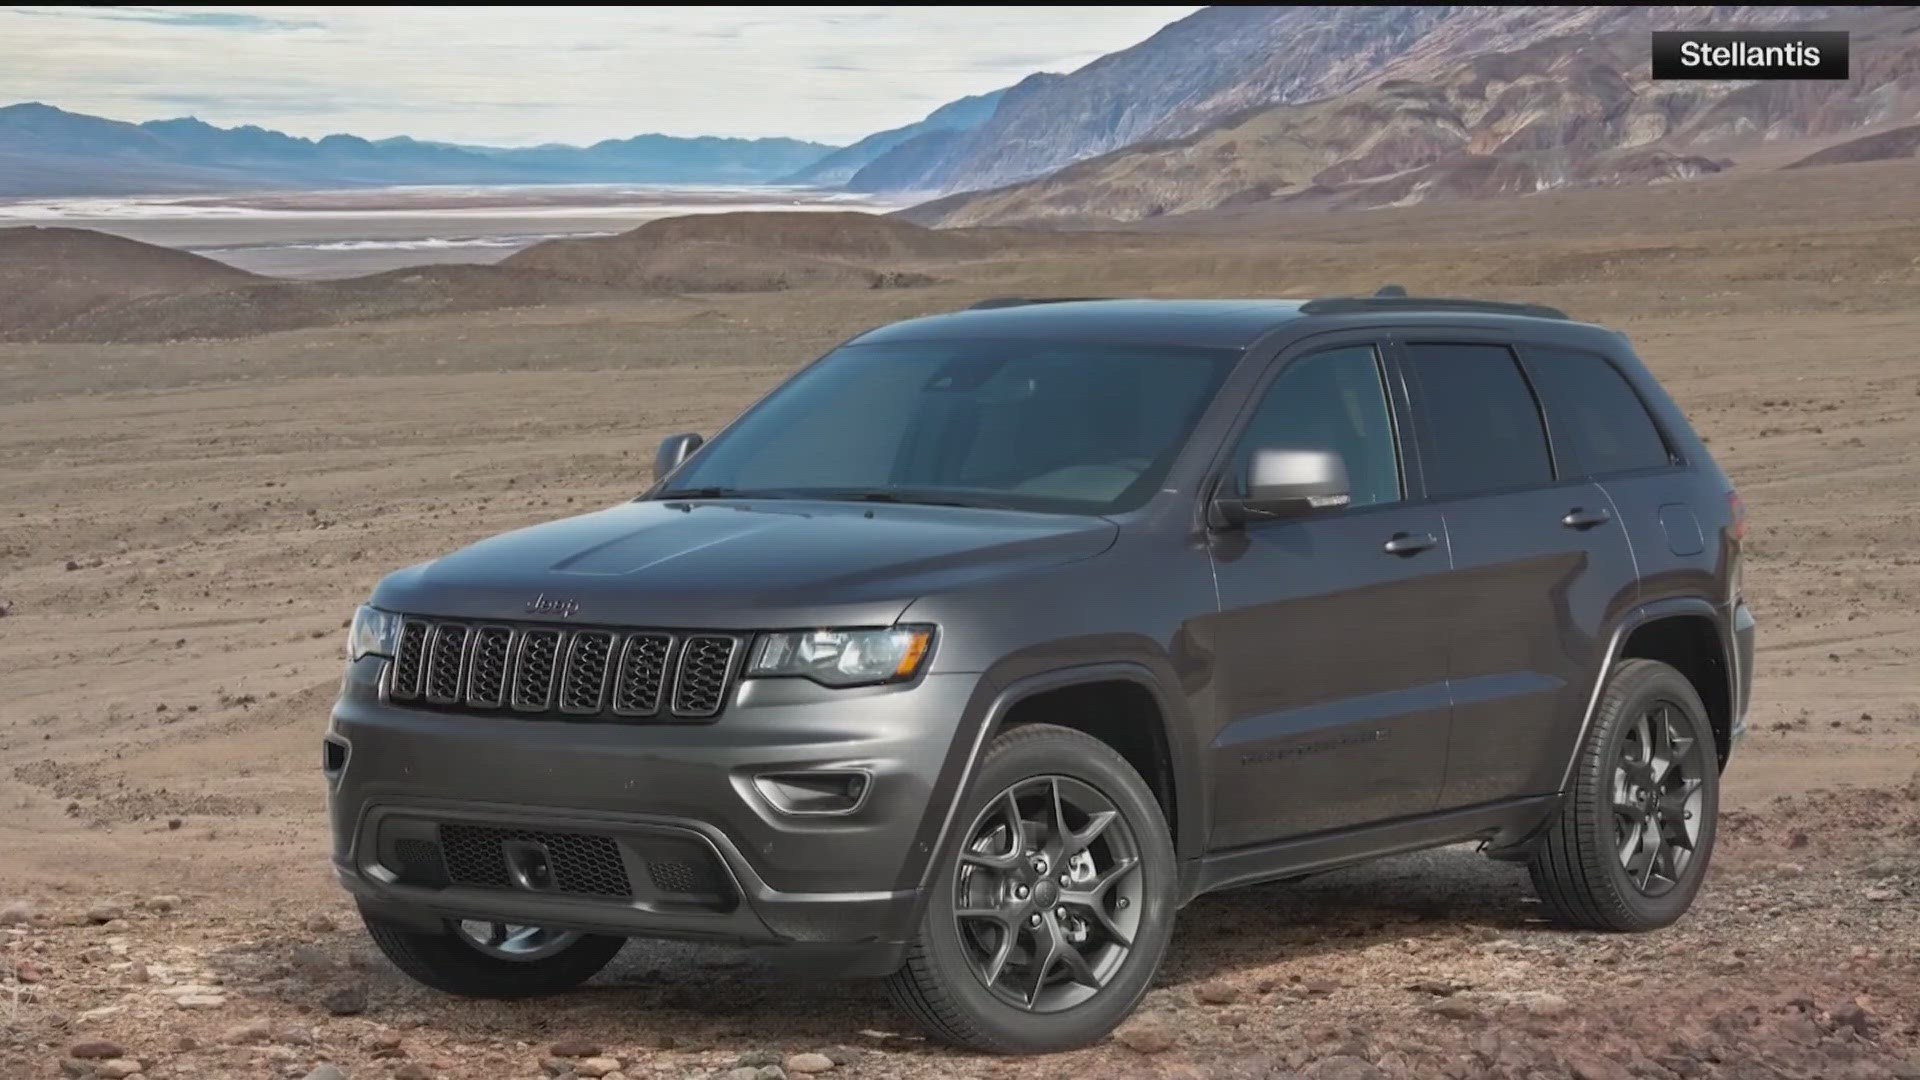 Chrysler is recalling more than 338,000 Jeep Grand Cherokees due to the potential risk of losing control of the vehicle.